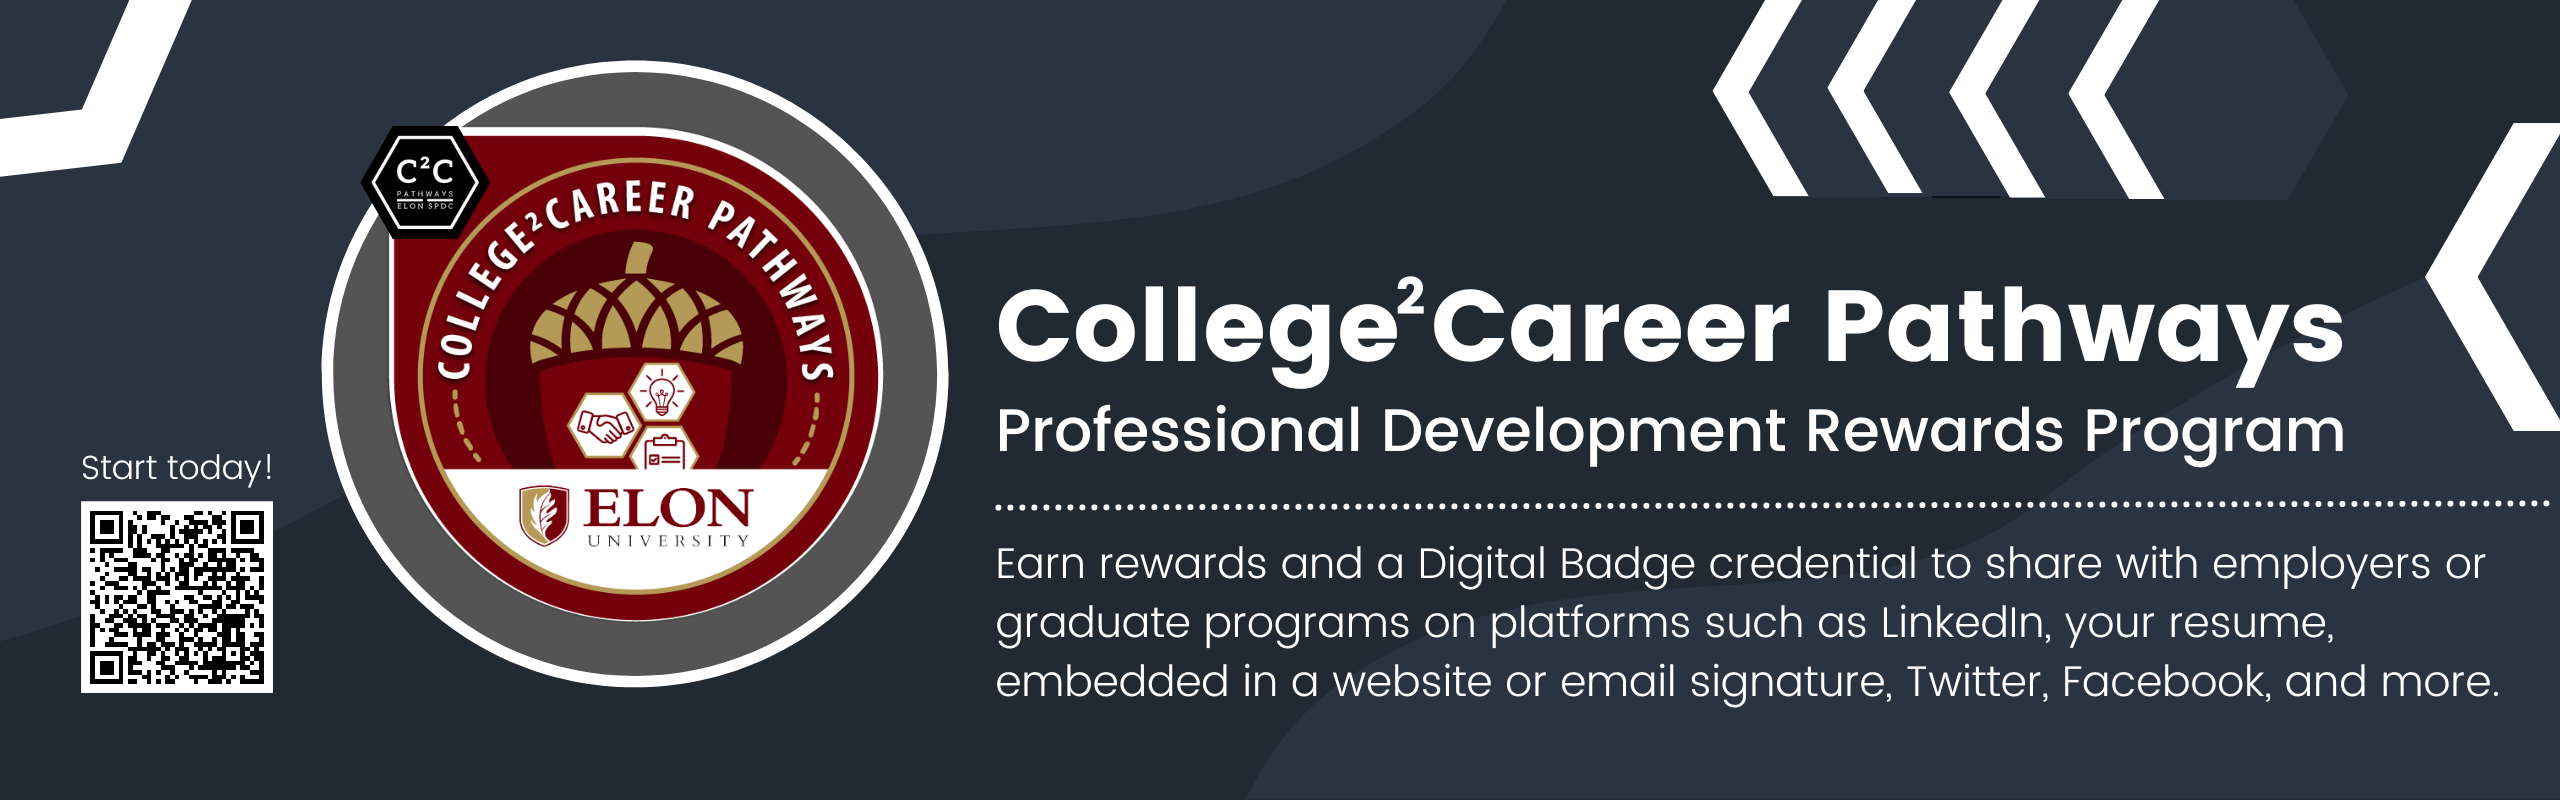 College2Career Pathways Professional Development Rewards Program now offers a Digital Badge issued by Elon University Review your progress on the Elon Job Network